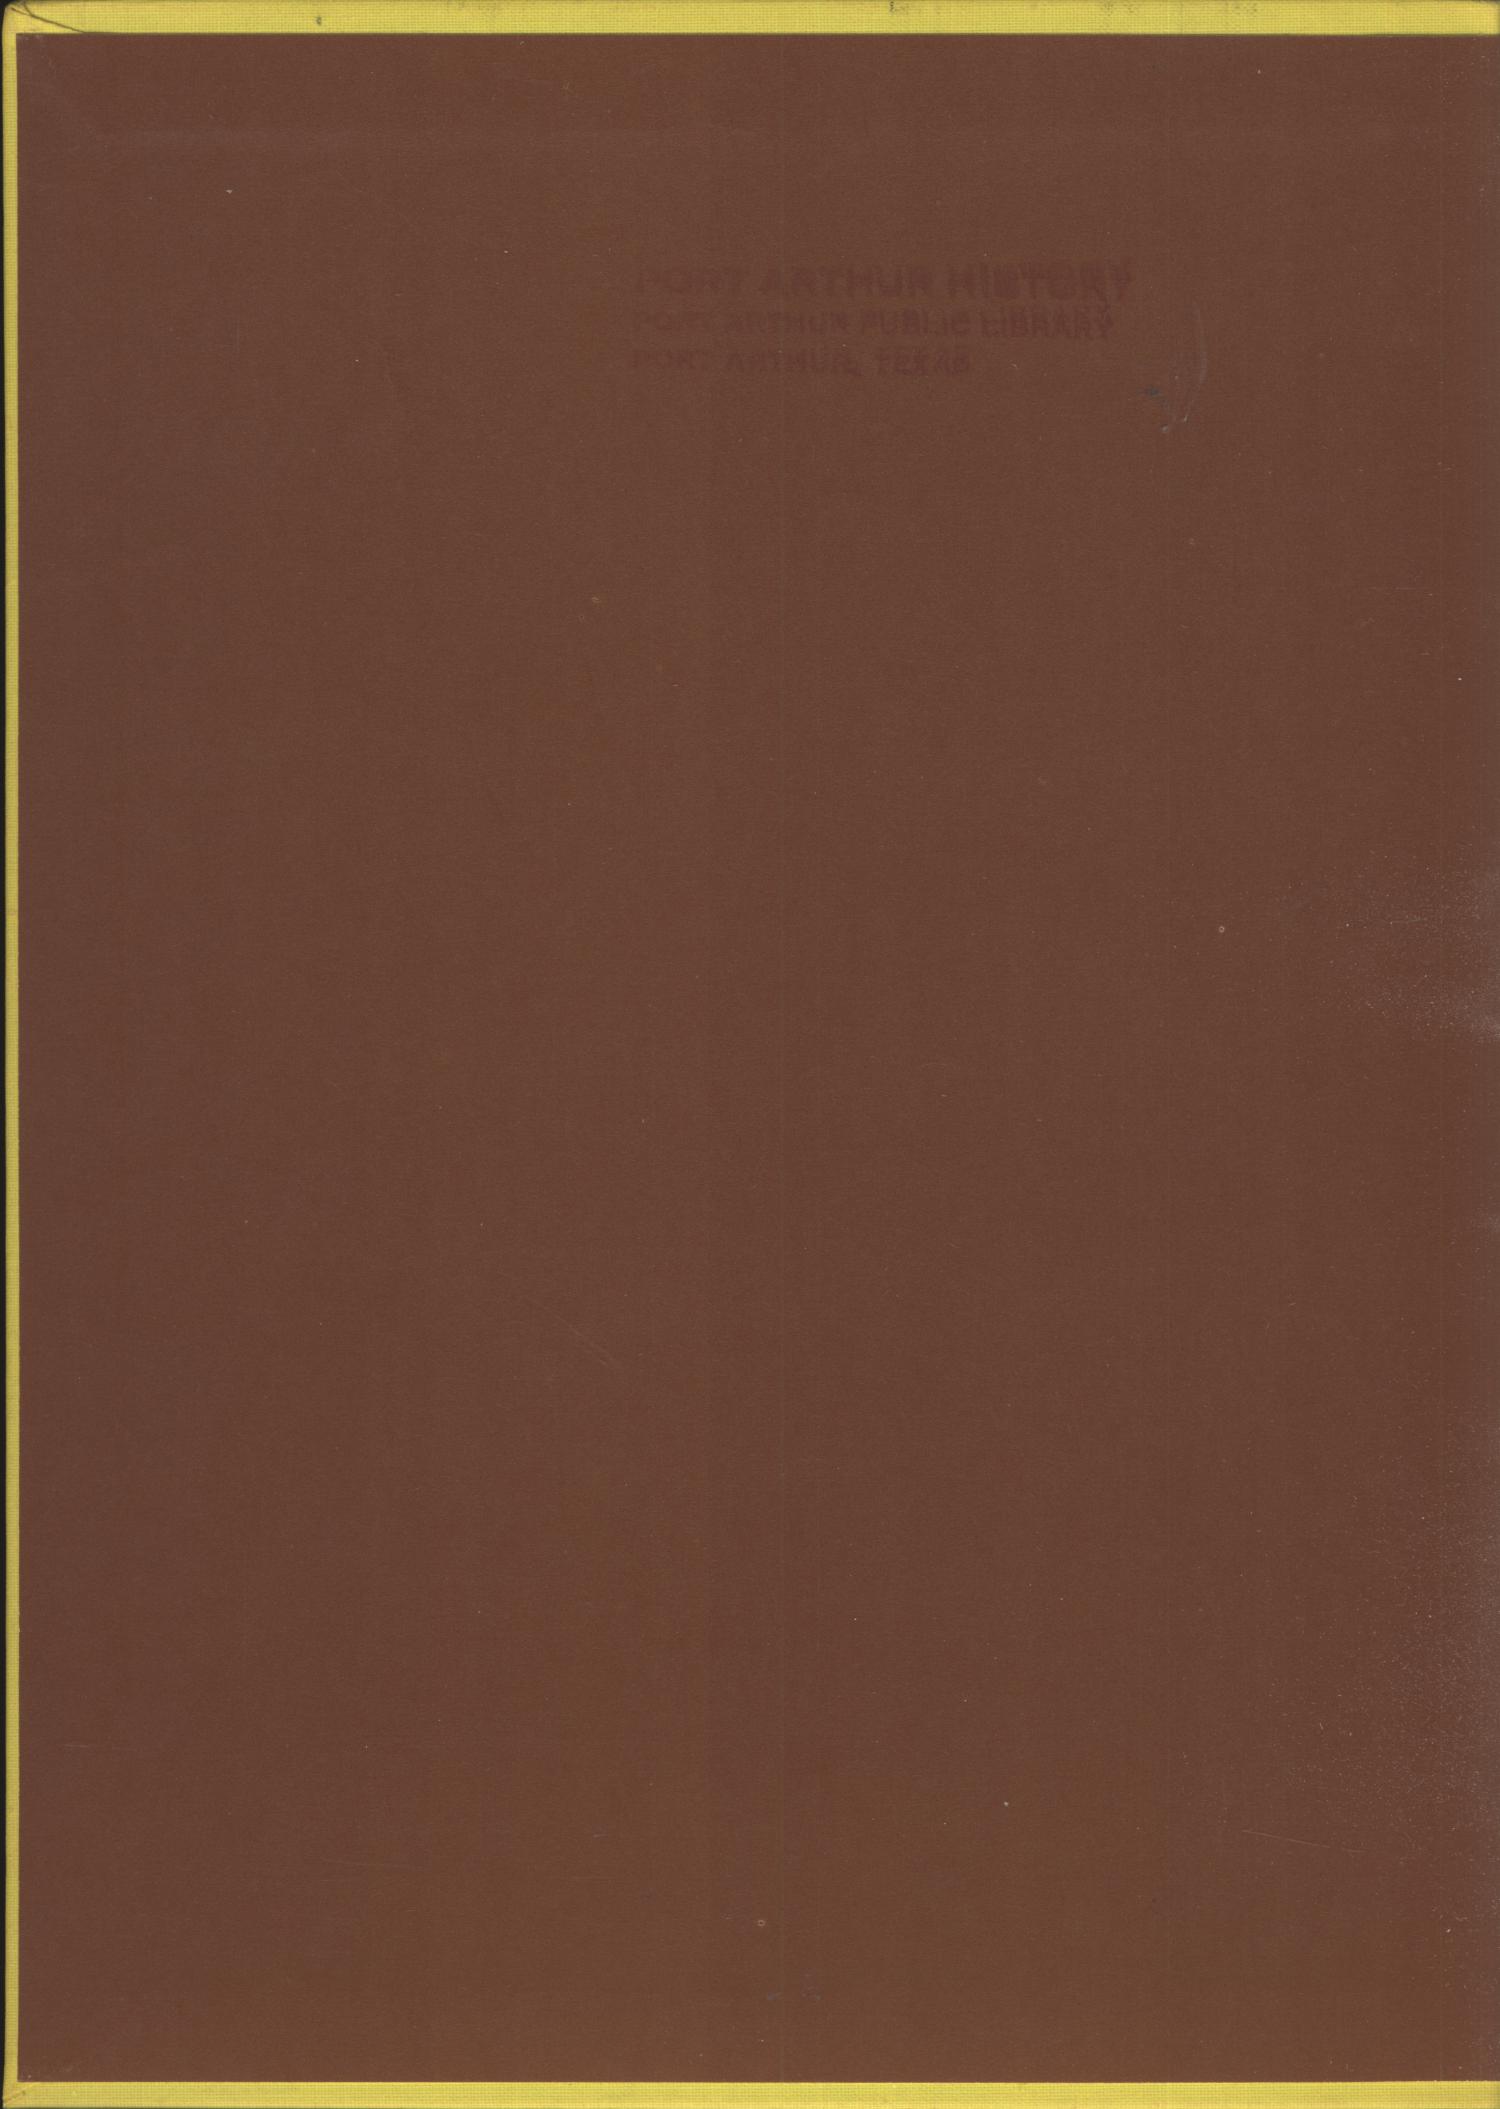 [The Cardinal], Yearbook of Lamar University, 1975
                                                
                                                    Front Inside
                                                